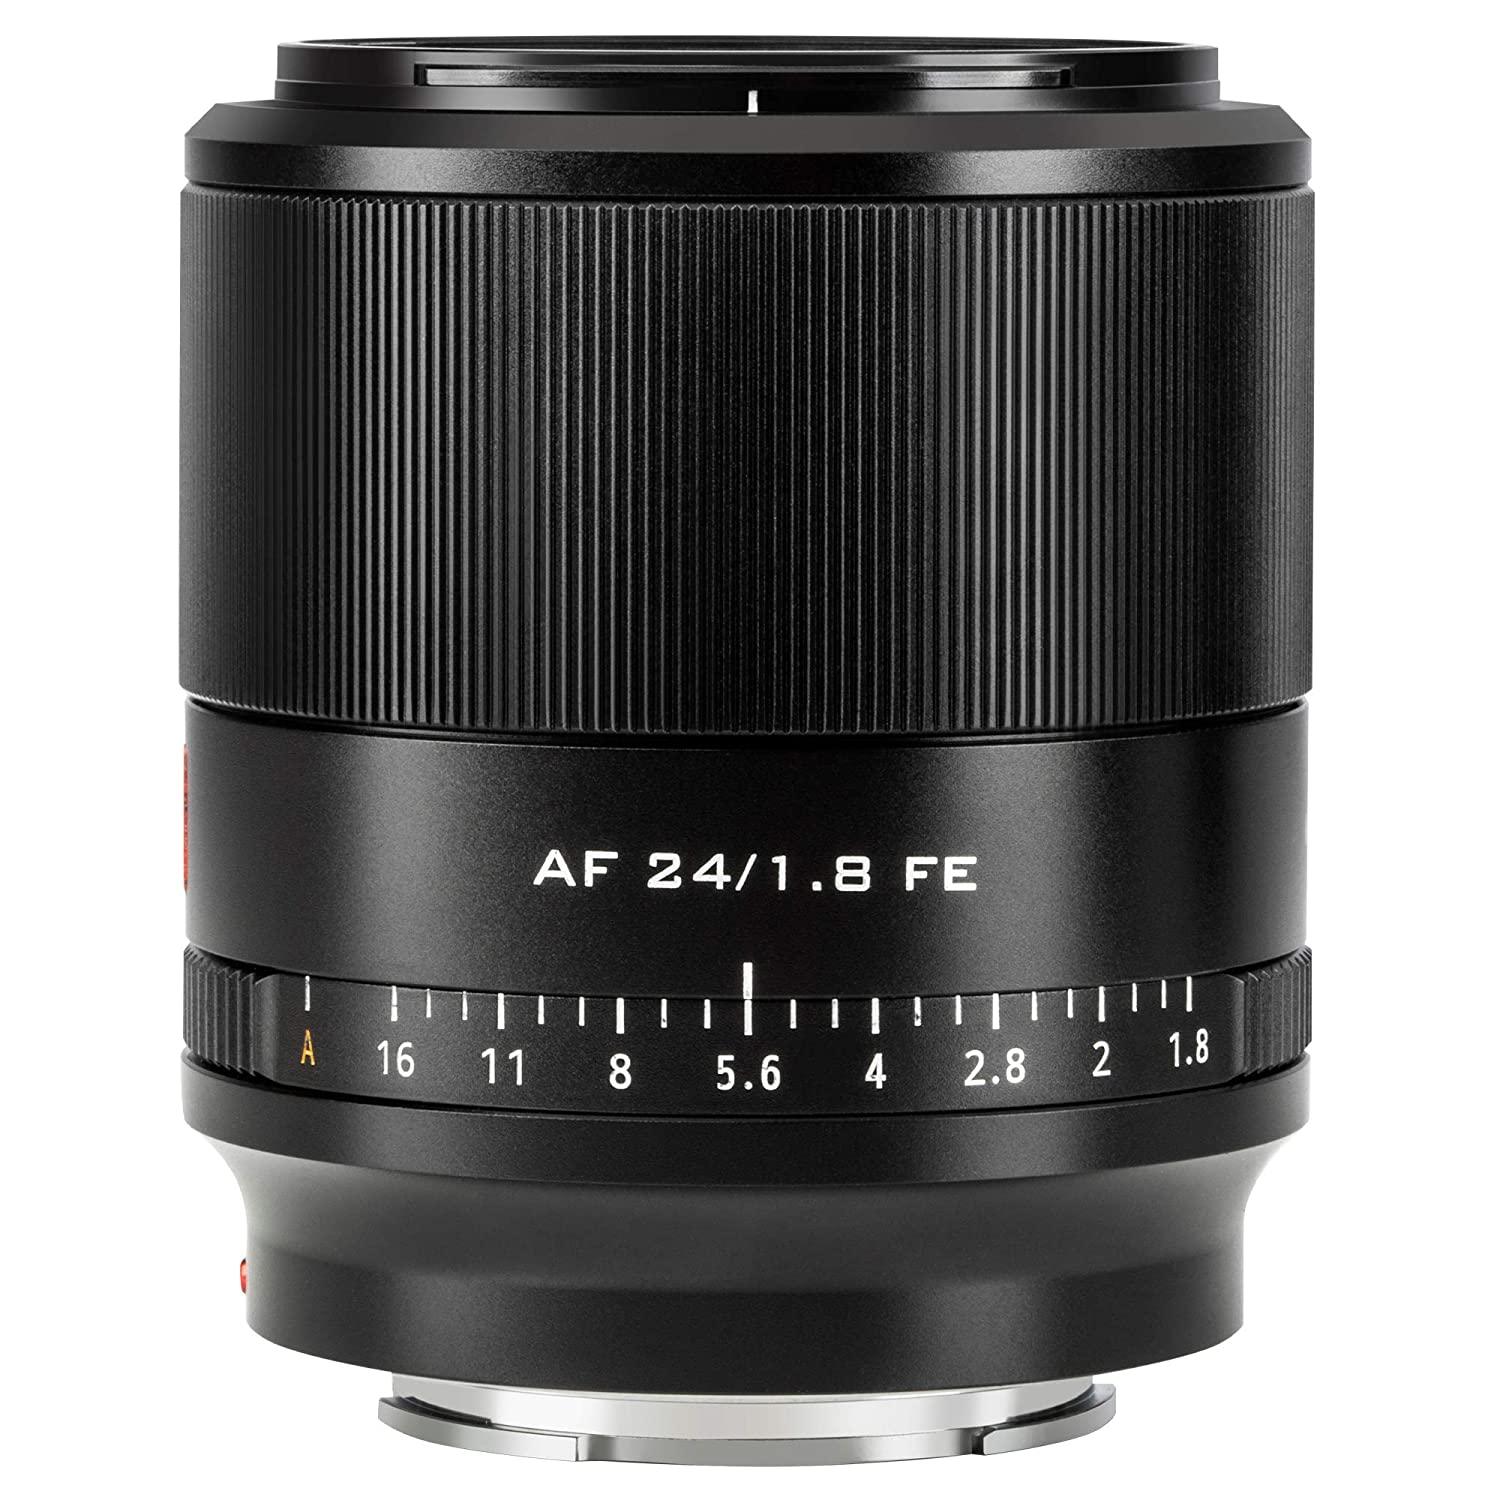 VILTROX FE 24mm f/1.8 F1.8 Full Frame Auto Focus Wide Angle Lens for Sony E Mount a7 a6500 - Digitek